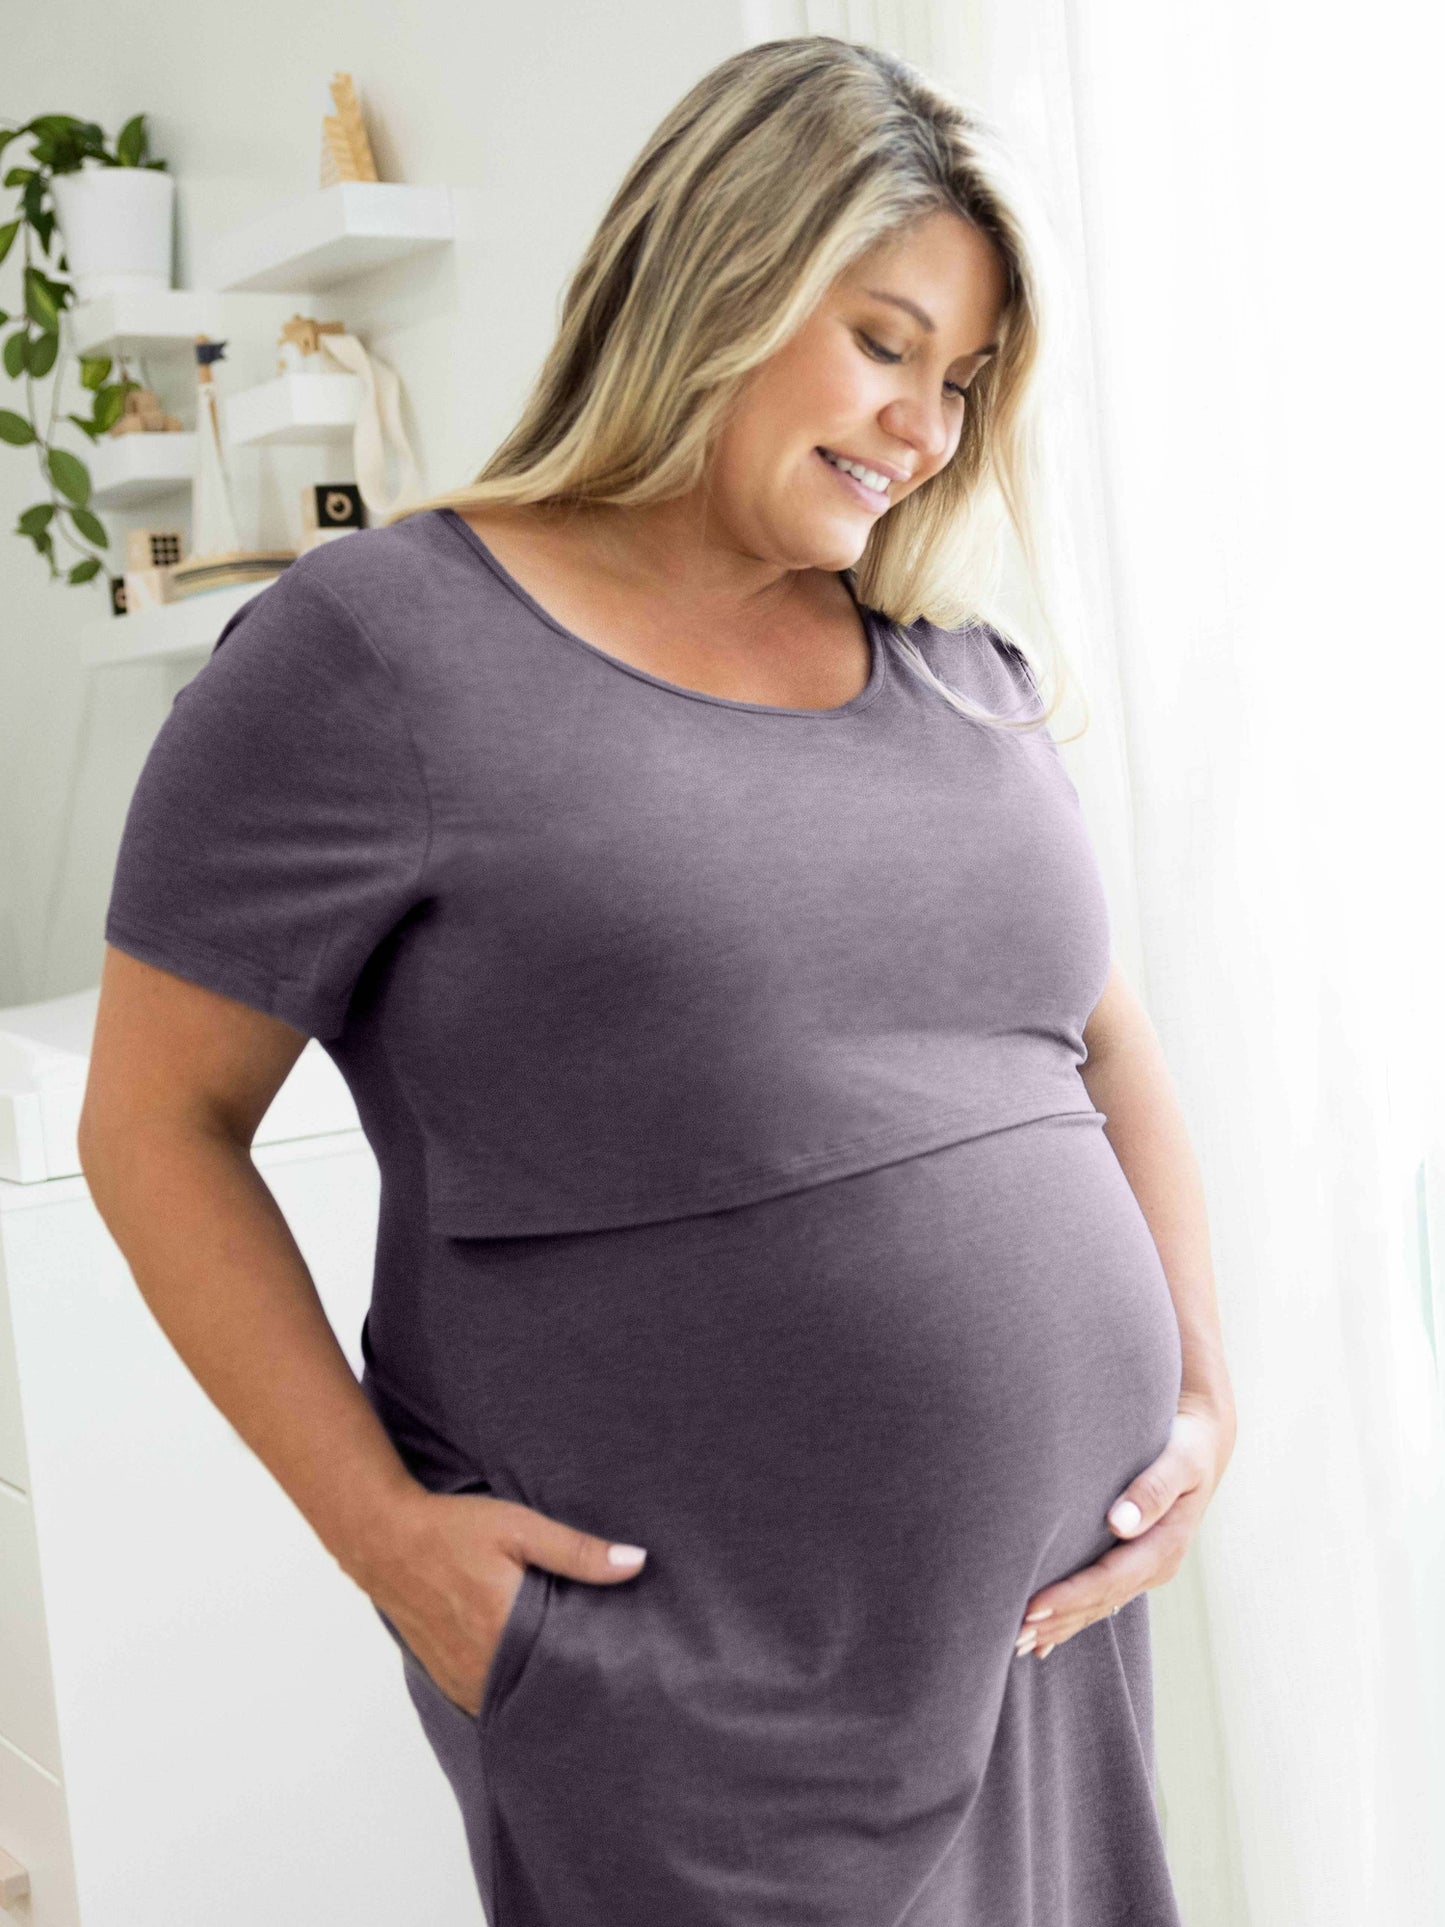 Model holding her pregnant belly while wearing the Eleanora Bamboo Maternity & Nursing Dress in Heathered Granite.